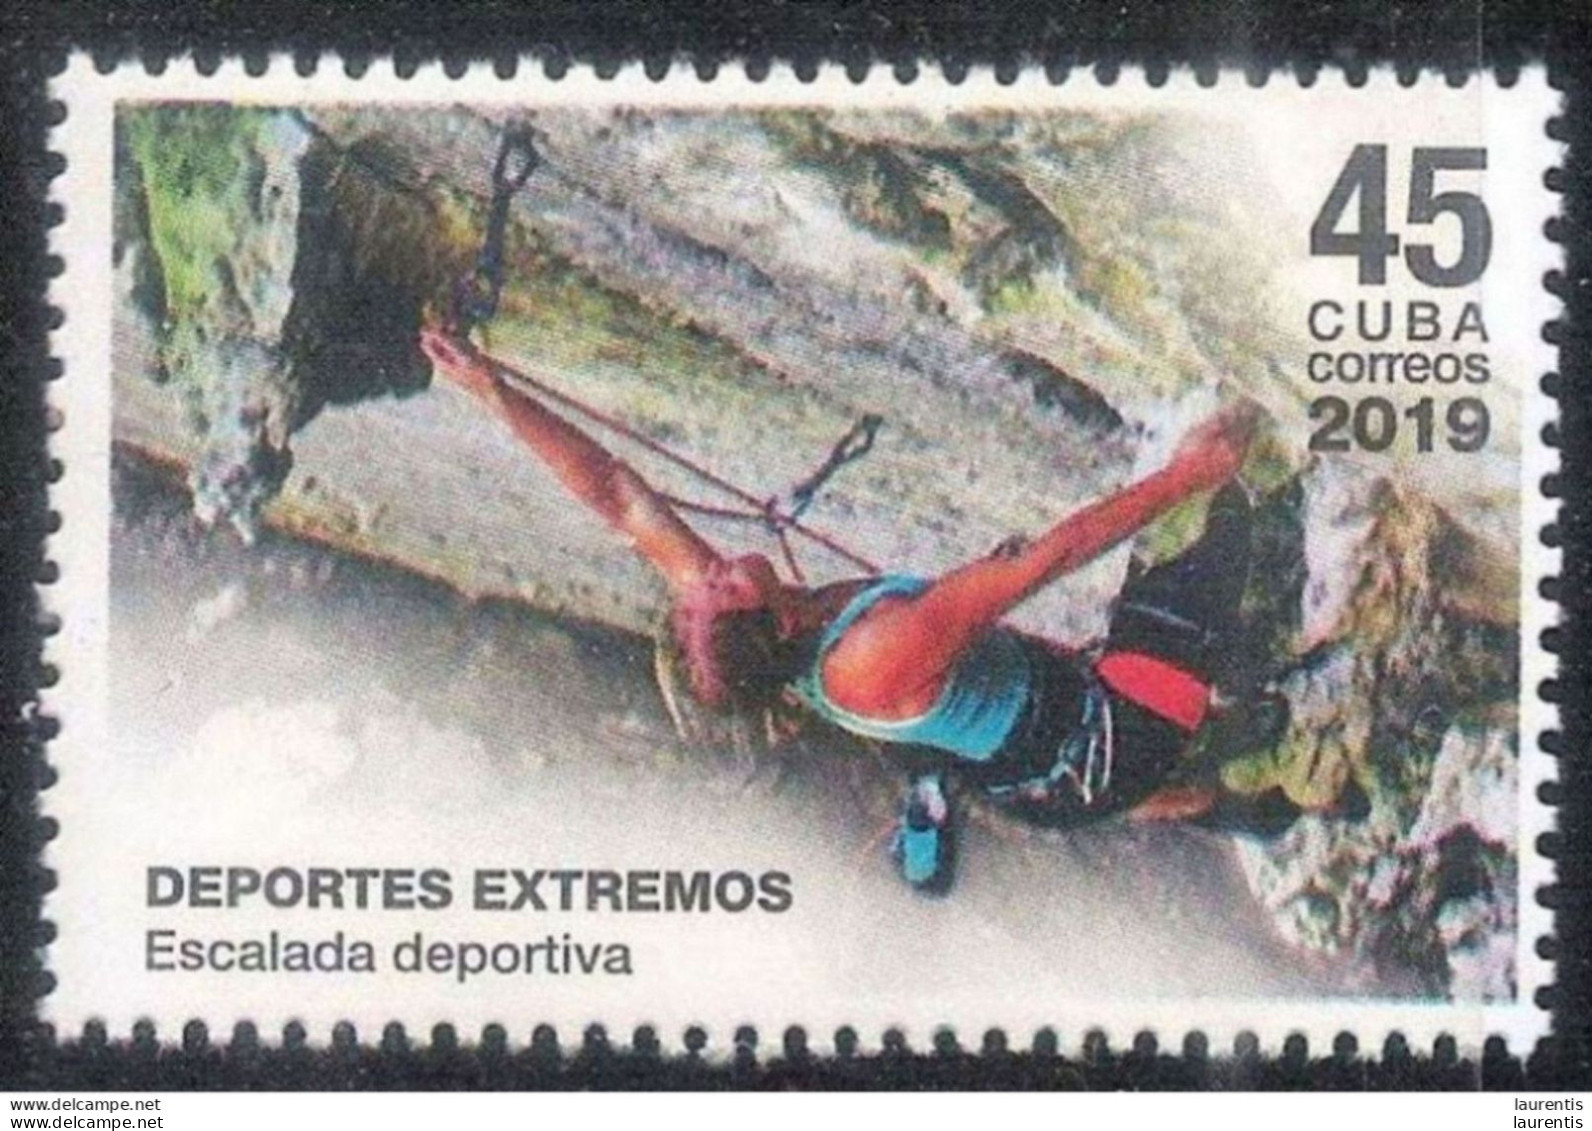 1253  Climbing - Only This One In The Stamp Set - MNH - Cb - 1,25 - Bergsteigen